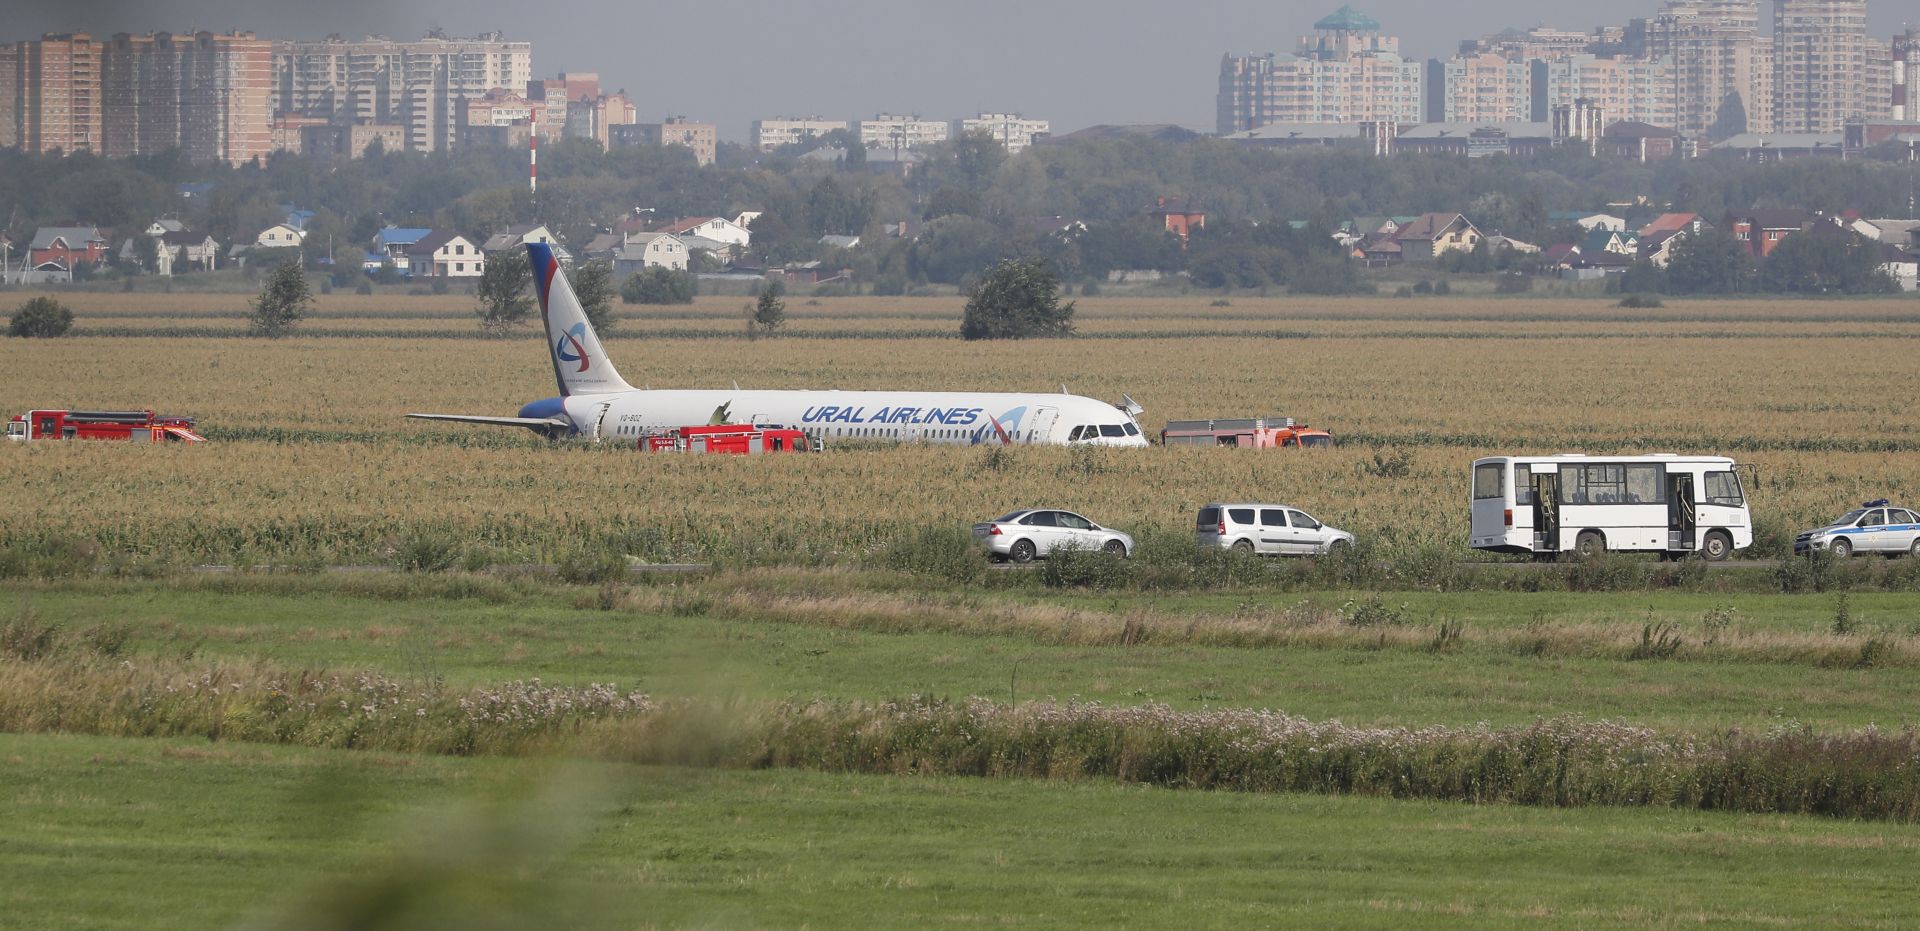 epa07774189 A general view shows a Ural Airlines A-321 passenger plane on the site of its emergency landing in a field outside Zhukovsky airport in Ramensky district of Moscow region, Russia, 15 August 2019. A-321 with 226 passengers and seven crew members on board en-route from Moscow to Simferopol made emergency landing after a right engine failure following the plane's colliding with seagulls shortly after take-off. Ten people were hospitalized following the accident.  EPA/SERGEI ILNITSKY